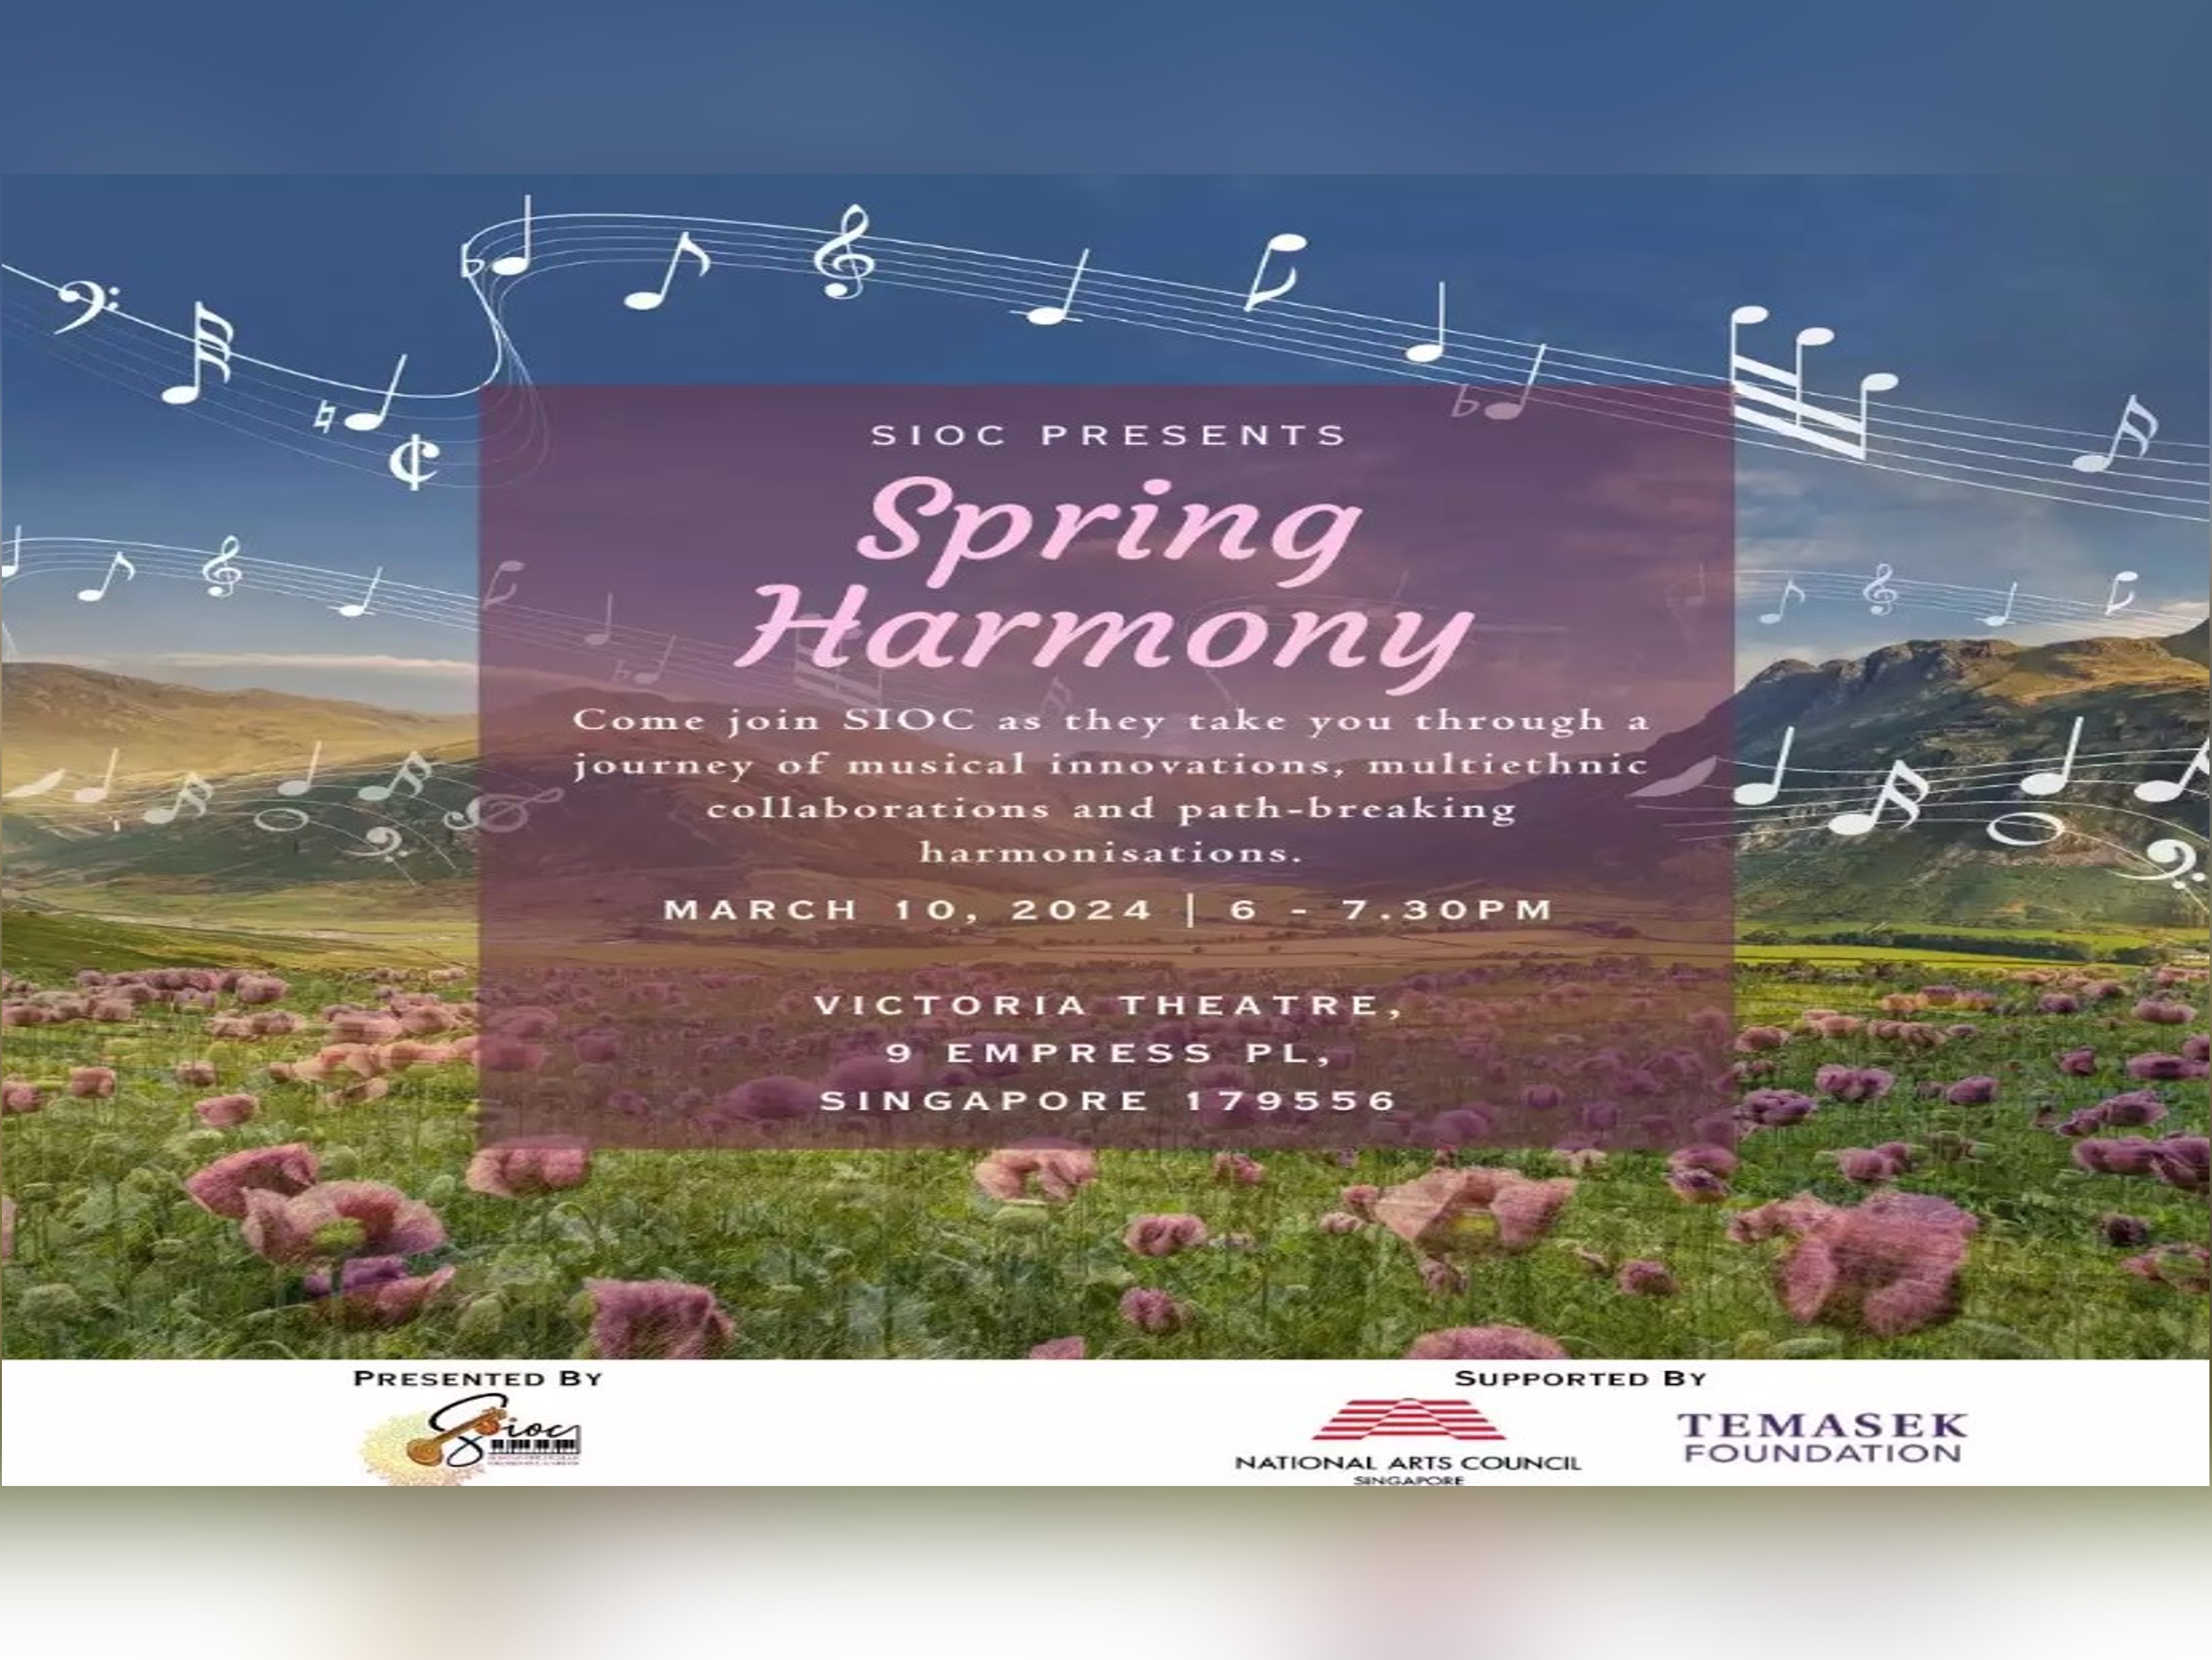 Spring Harmony - A Music Concert By Singapore Indian Orchestra & Choir